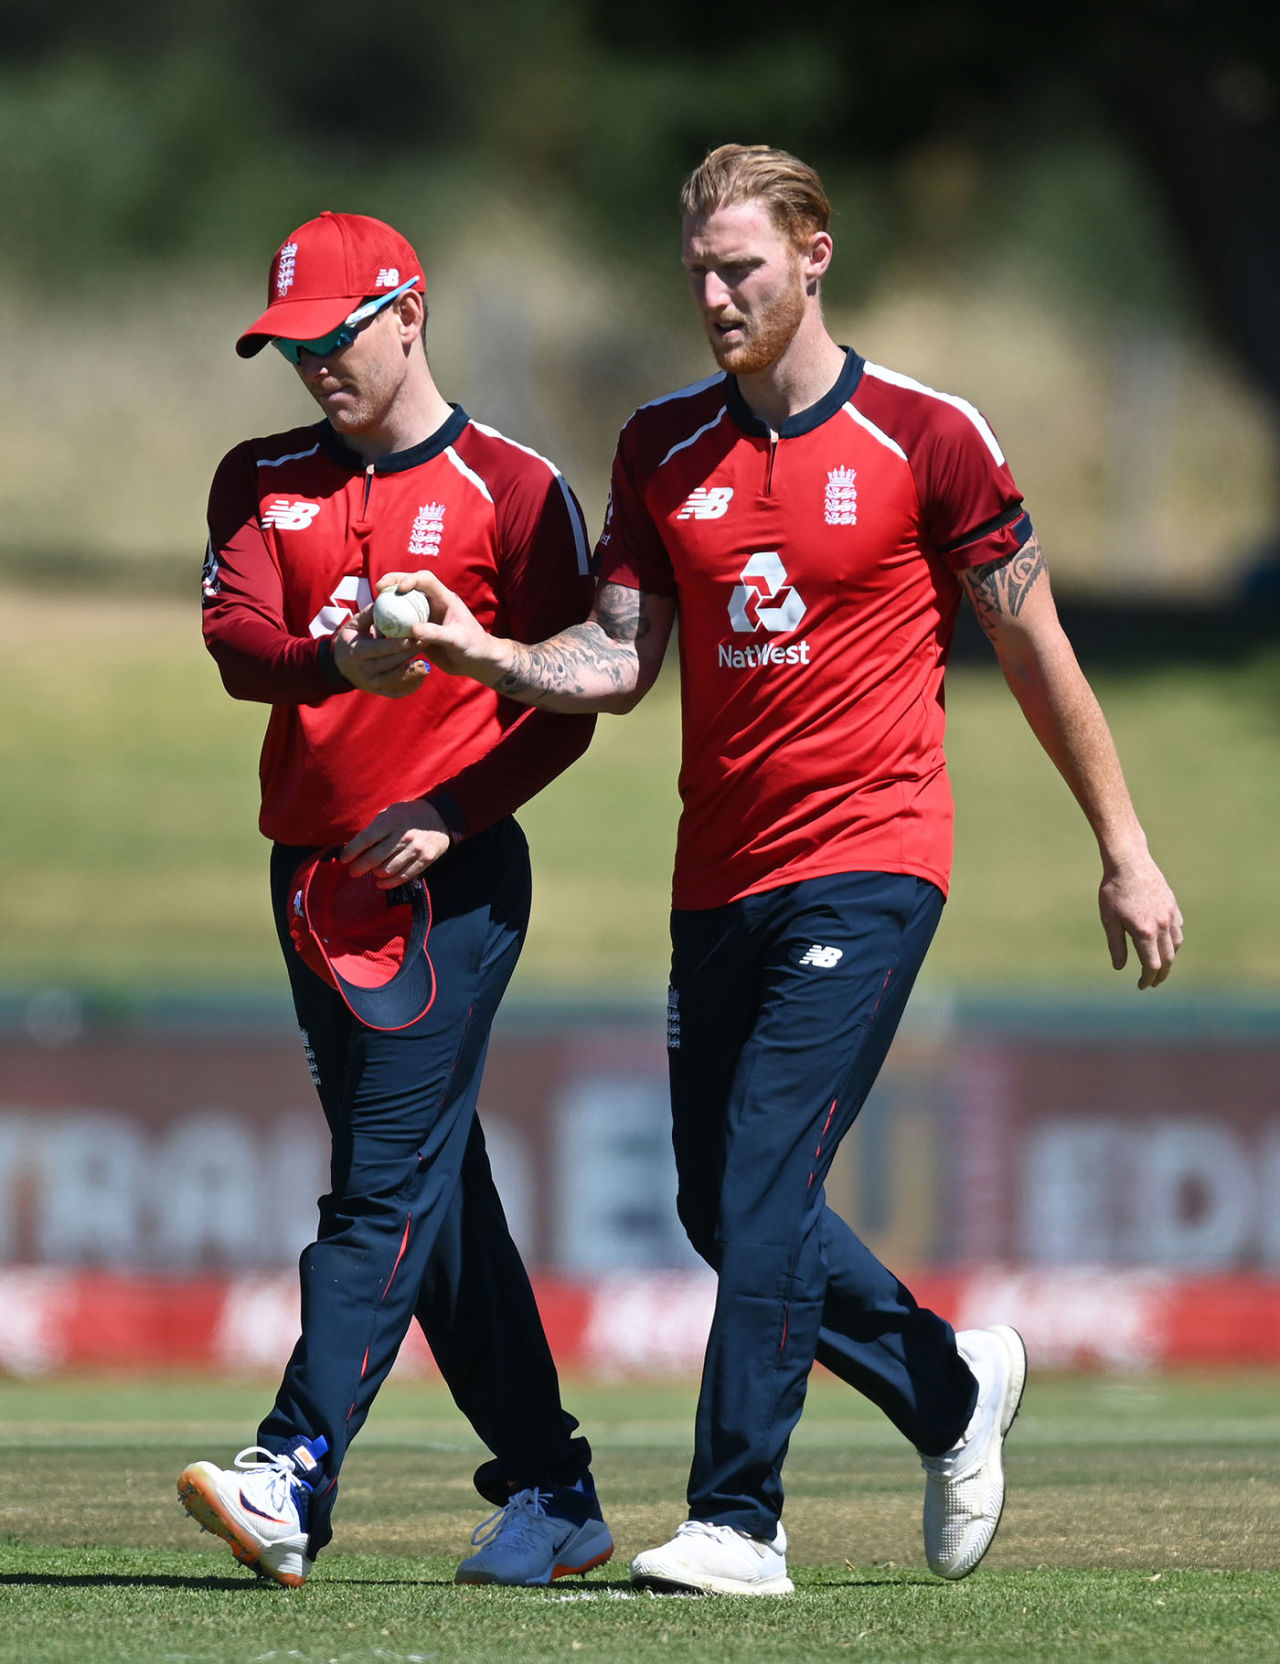 Ben Stokes was given a bowl for the first time this tour, South Africa vs England, 2nd T20I, Paarl, November 29, 2020